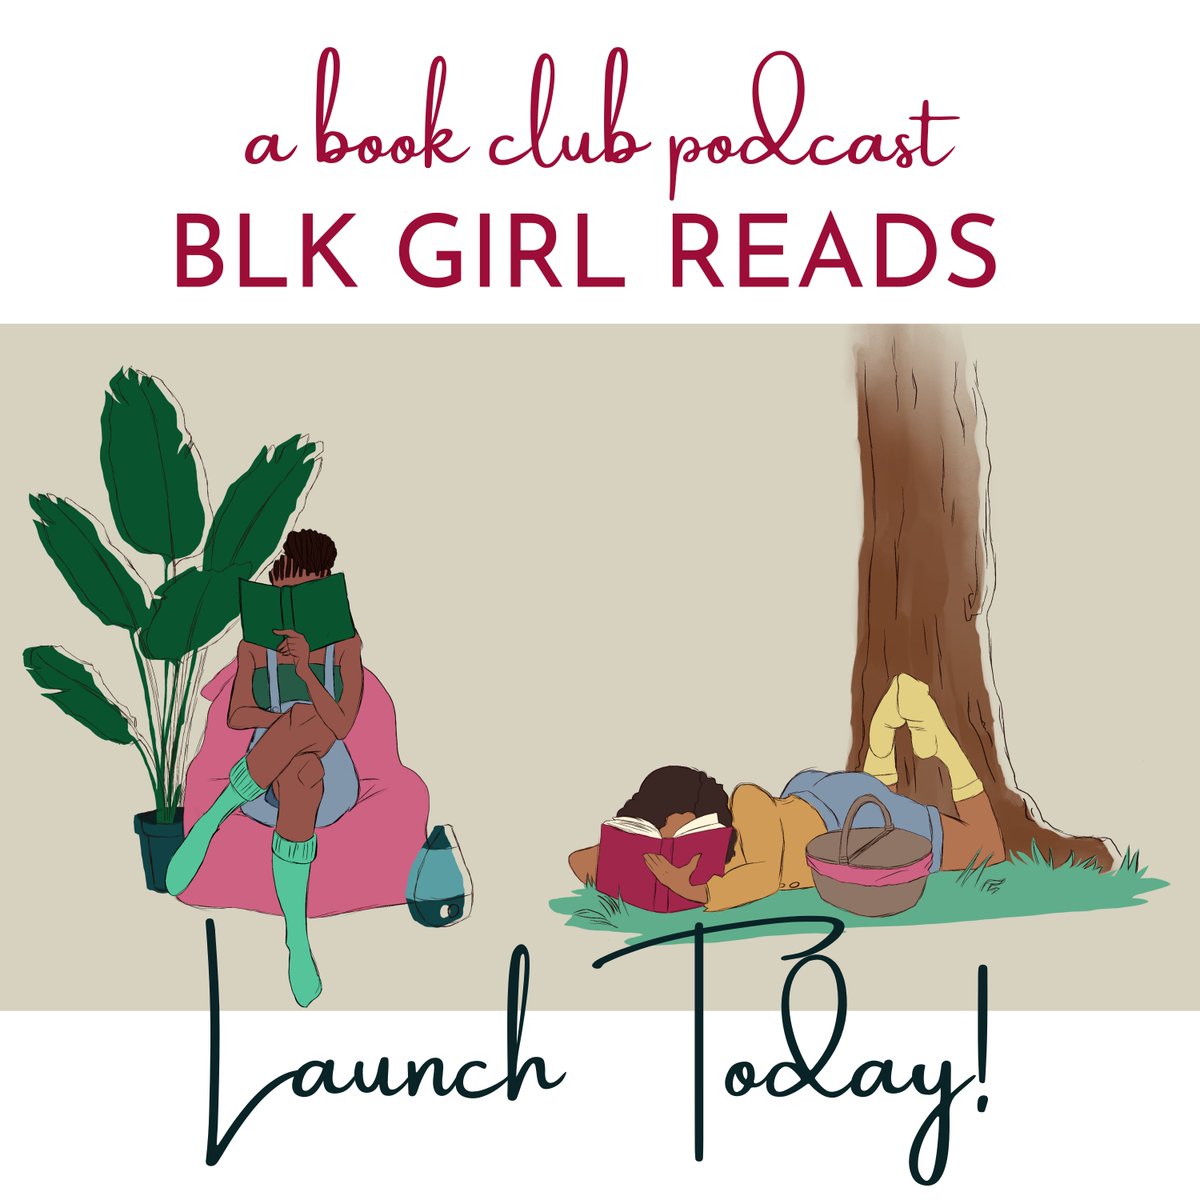 🥳 We're thrilled to announce the launch of our podcast, BLK Girl Reads! Our first two episodes are now available, and we can't wait for you to dive in! BLKGirlReads.com #blkgirlreads #blkgirlreadspodcast #blackbookclub #fantasybooks #romancebooks #romancebookclub